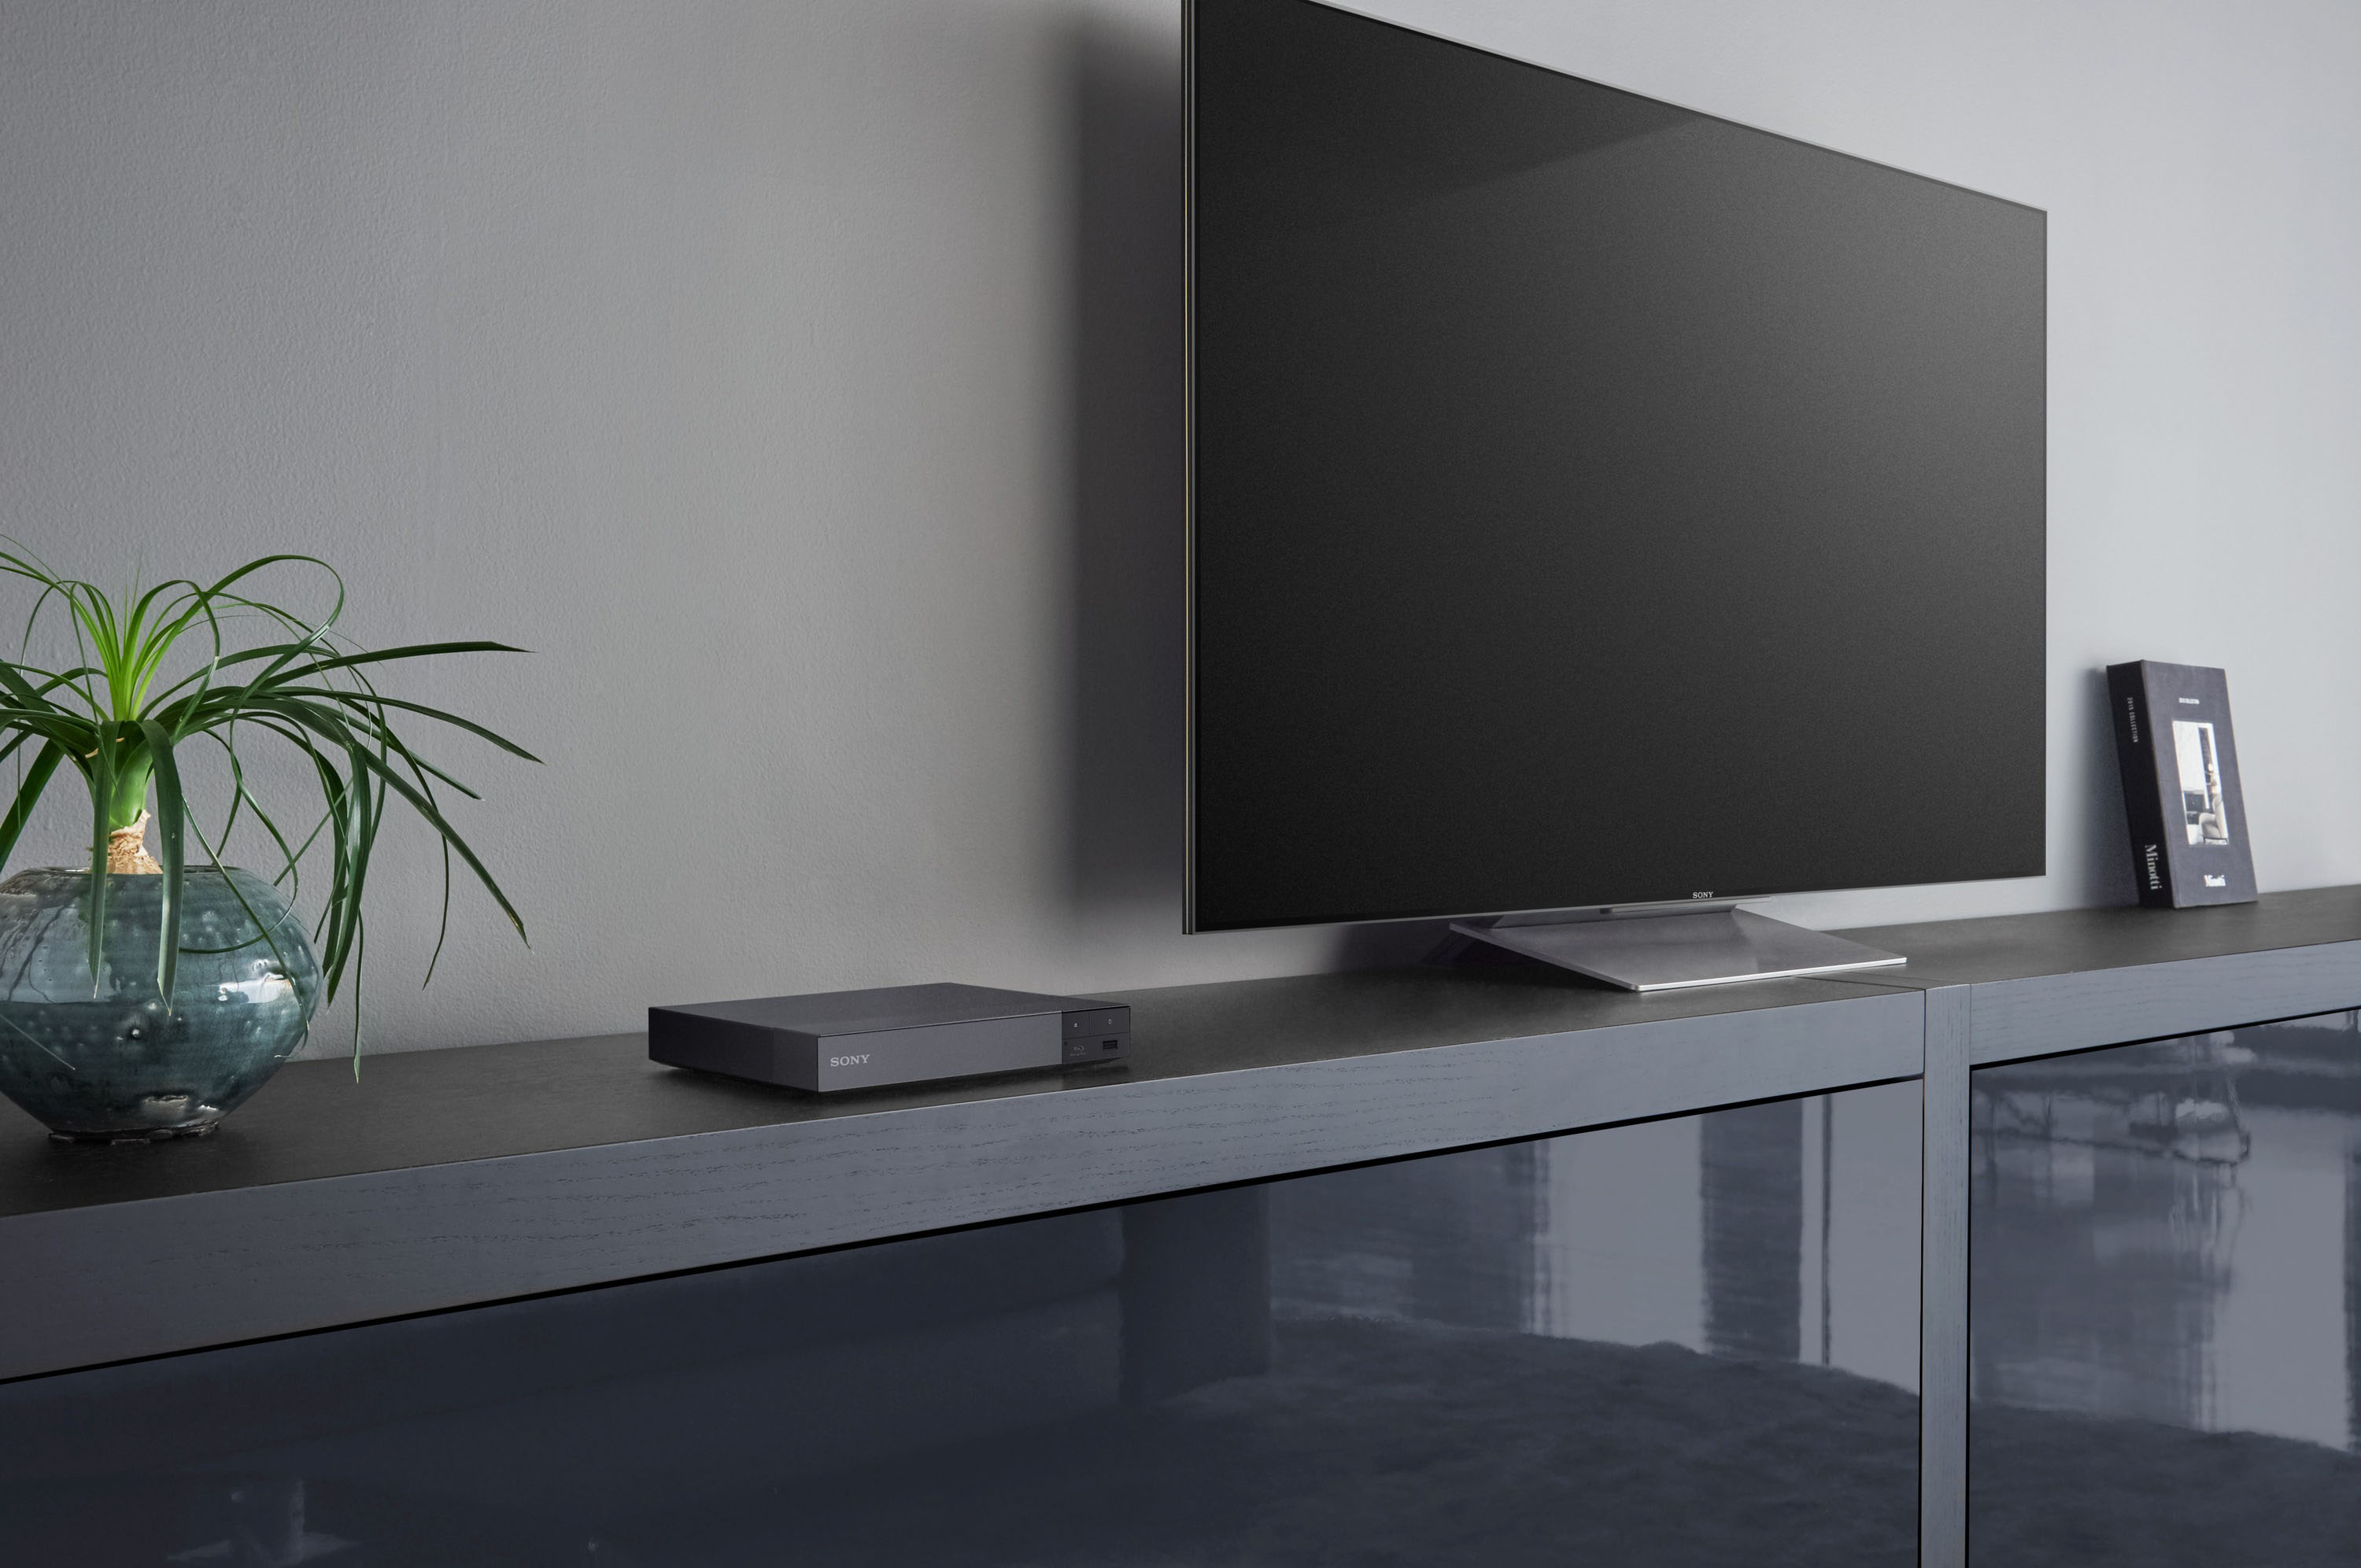 Sony BDP-S6700 Streaming 4K Upscaling Wi-Fi Built-In Blu-ray